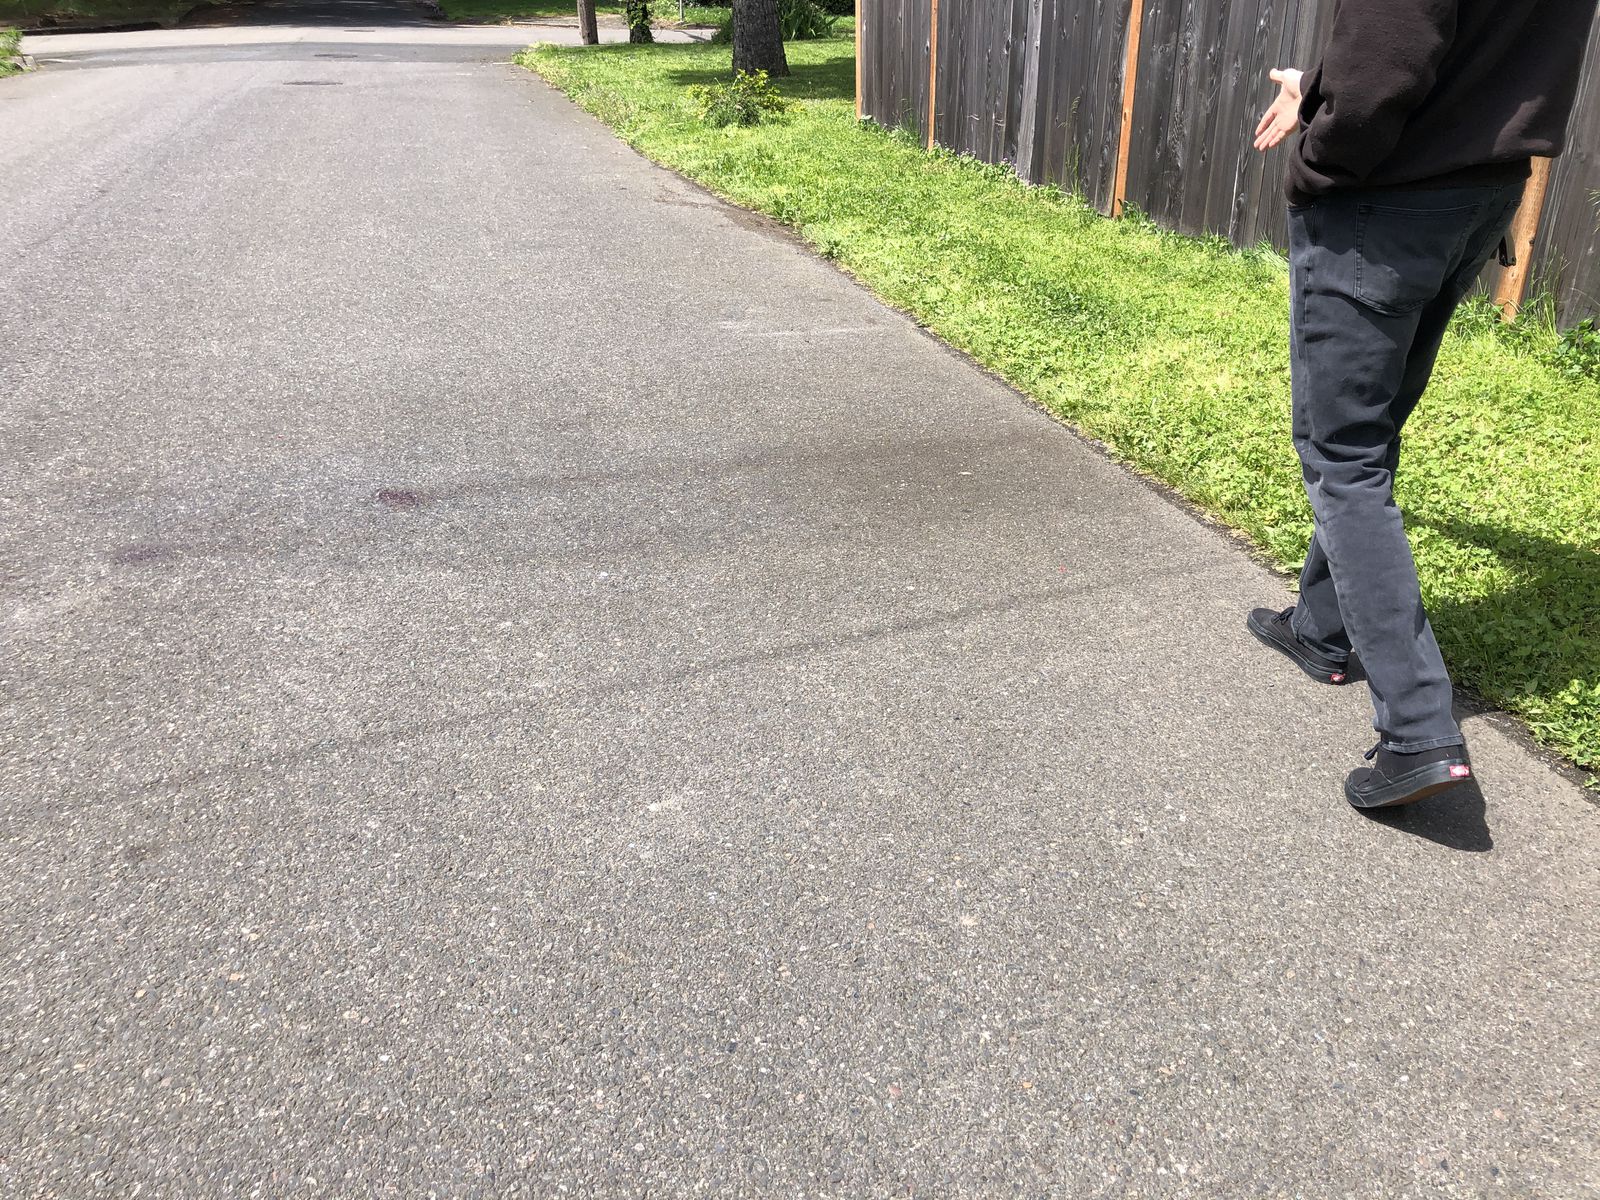 A neighbor shows the spot on Northeast Mason Street where residents found shattered glass from a silver Lexus stopped by police, and a blood spot on the pavement near where a motorist had been shot by police in an exchange of gunfire Friday night, May 6, 2022. 